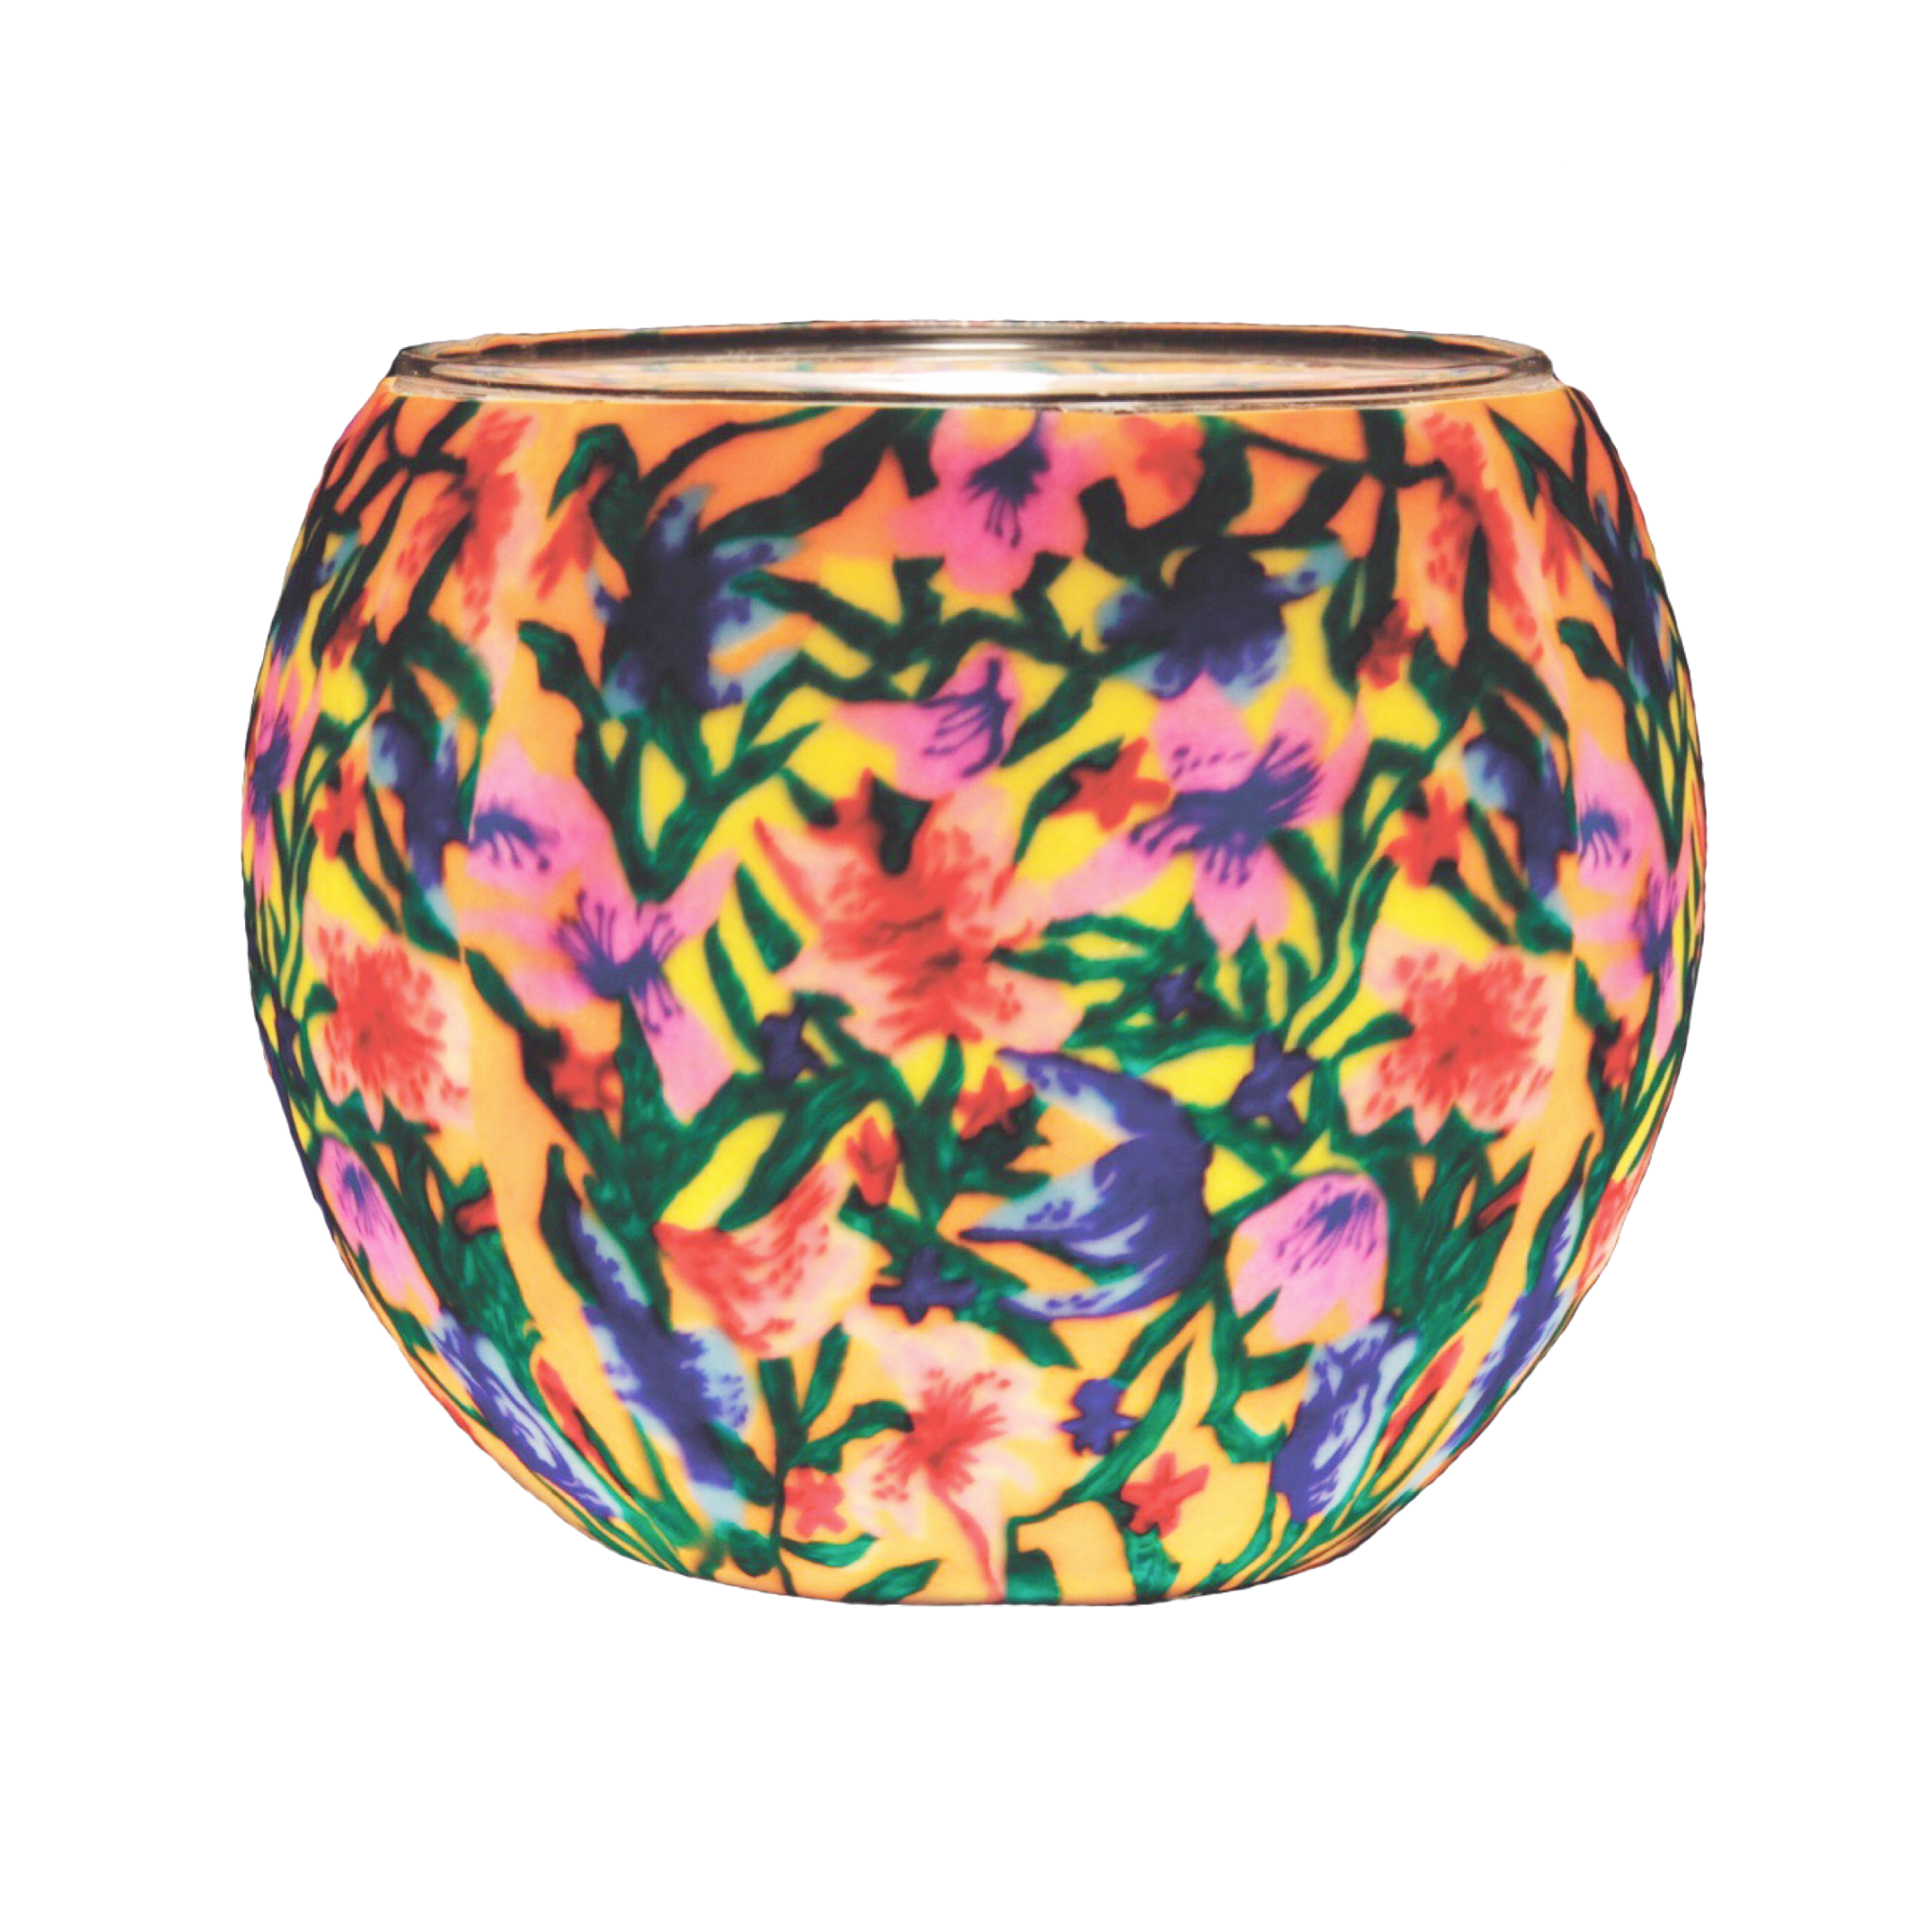 21413 Summer Flowers, 11cm Glowing Glass, Pack of 6